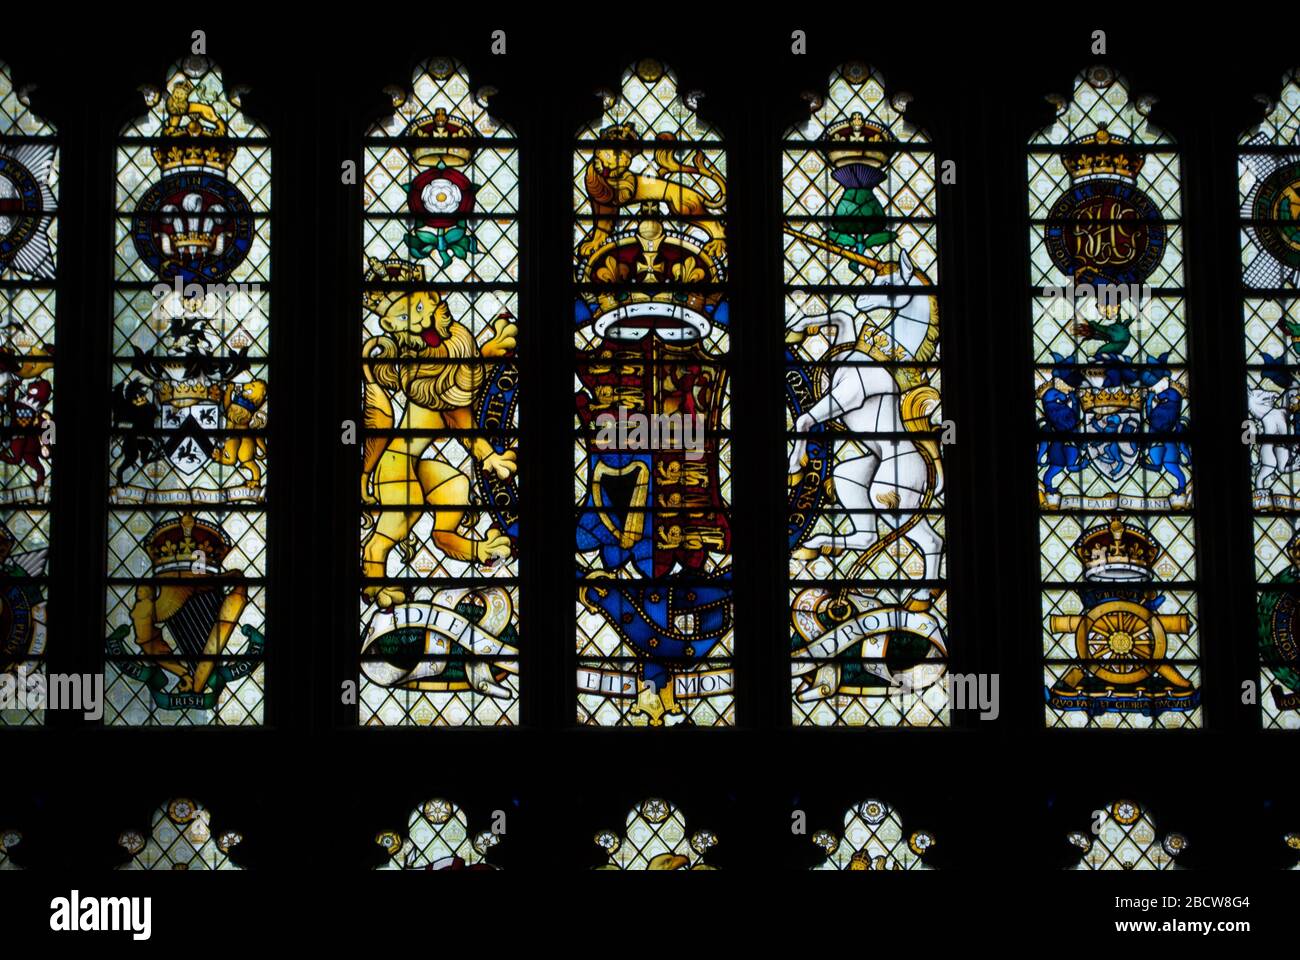 Stained Glass Windows at Westminster Hall, Palace of Westminster, London SW1 Stock Photo